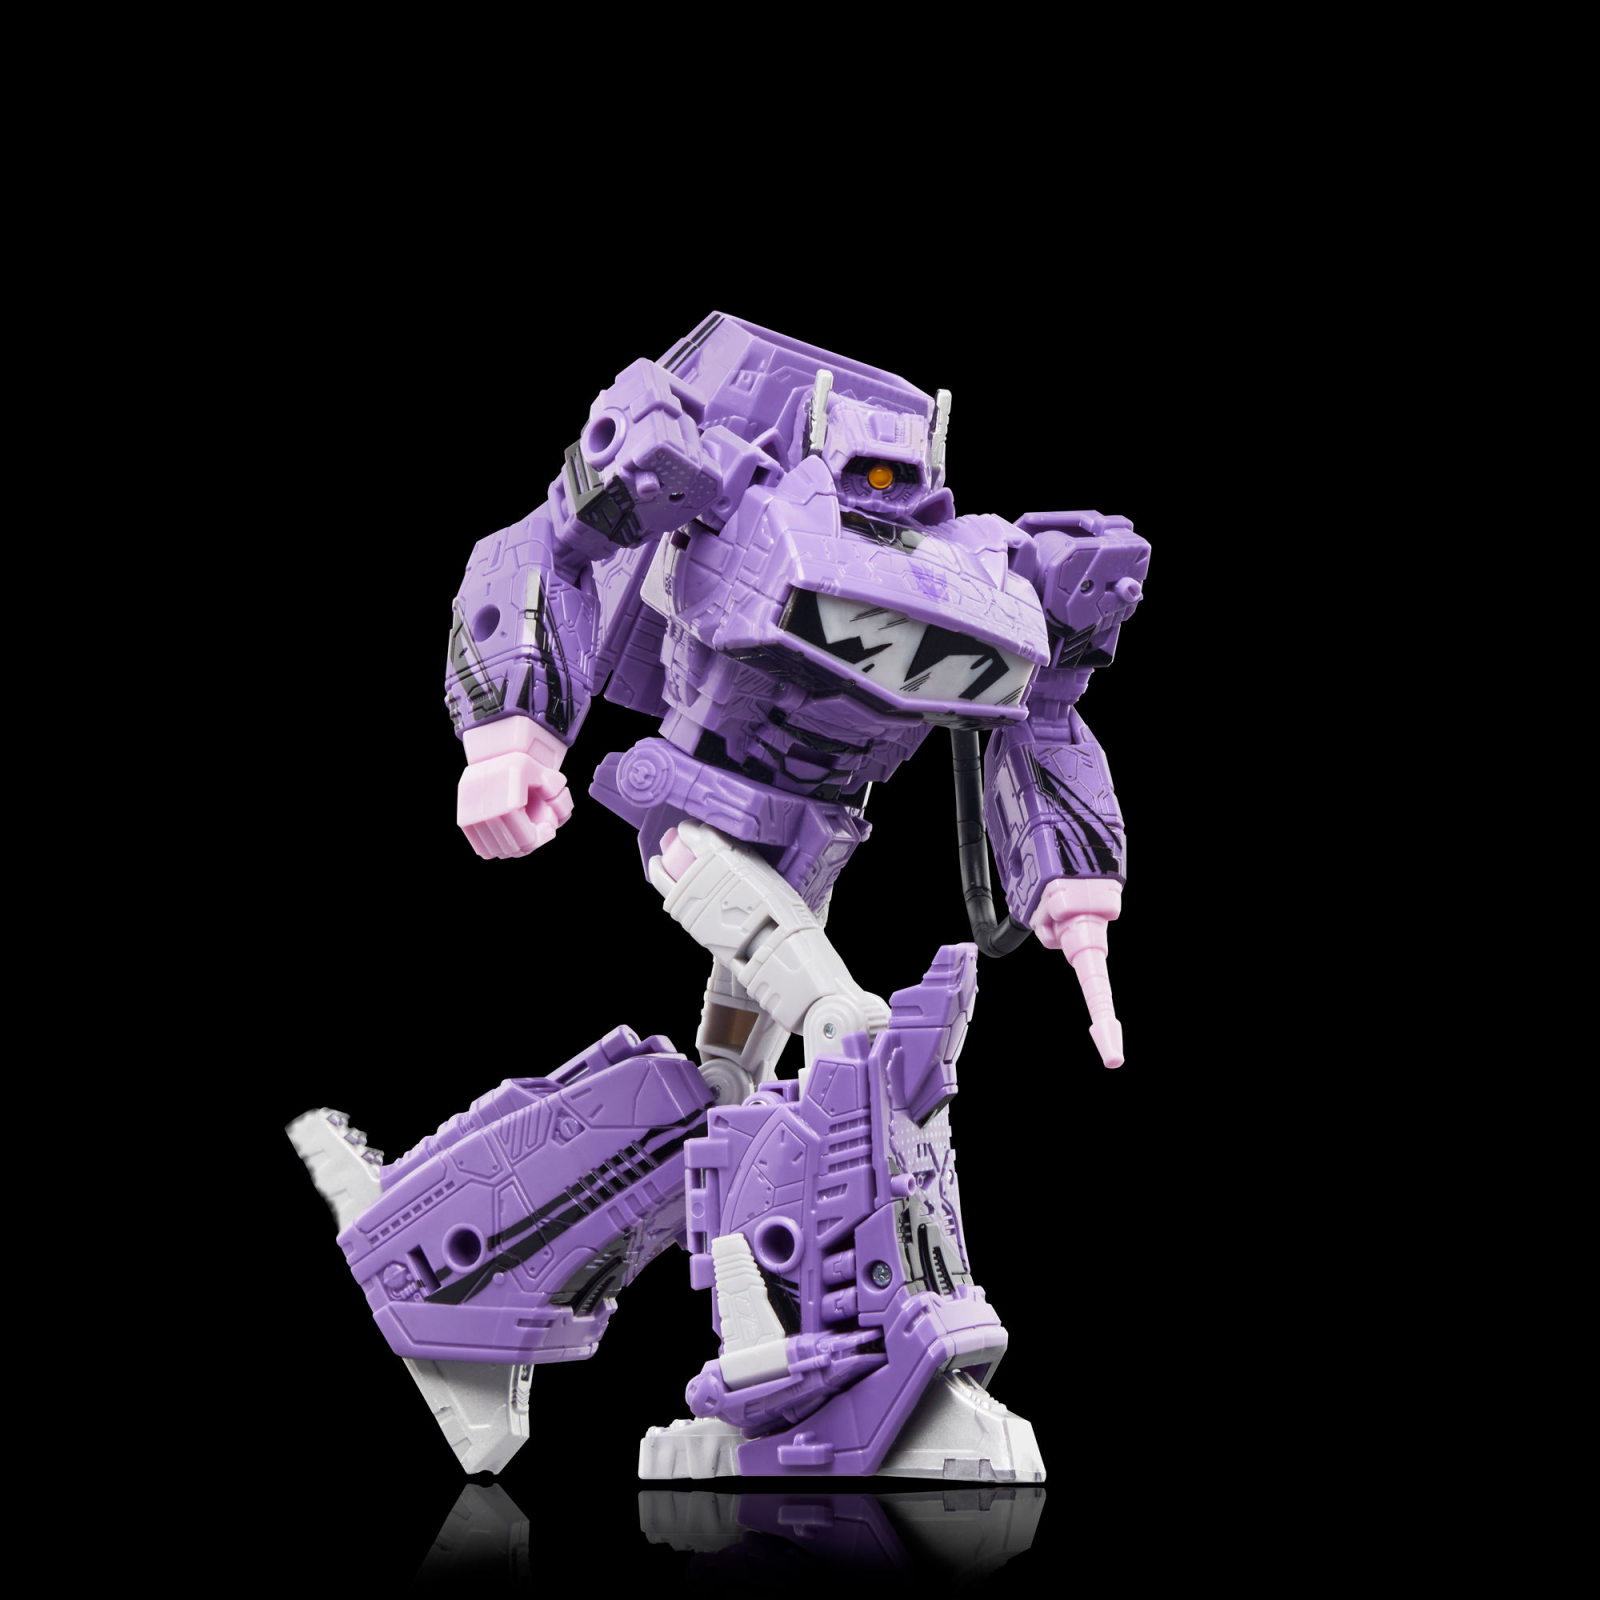 Transformers News: More Images of Upcoming Generations Wheeljack, Shockwave and Grimlock Redecos